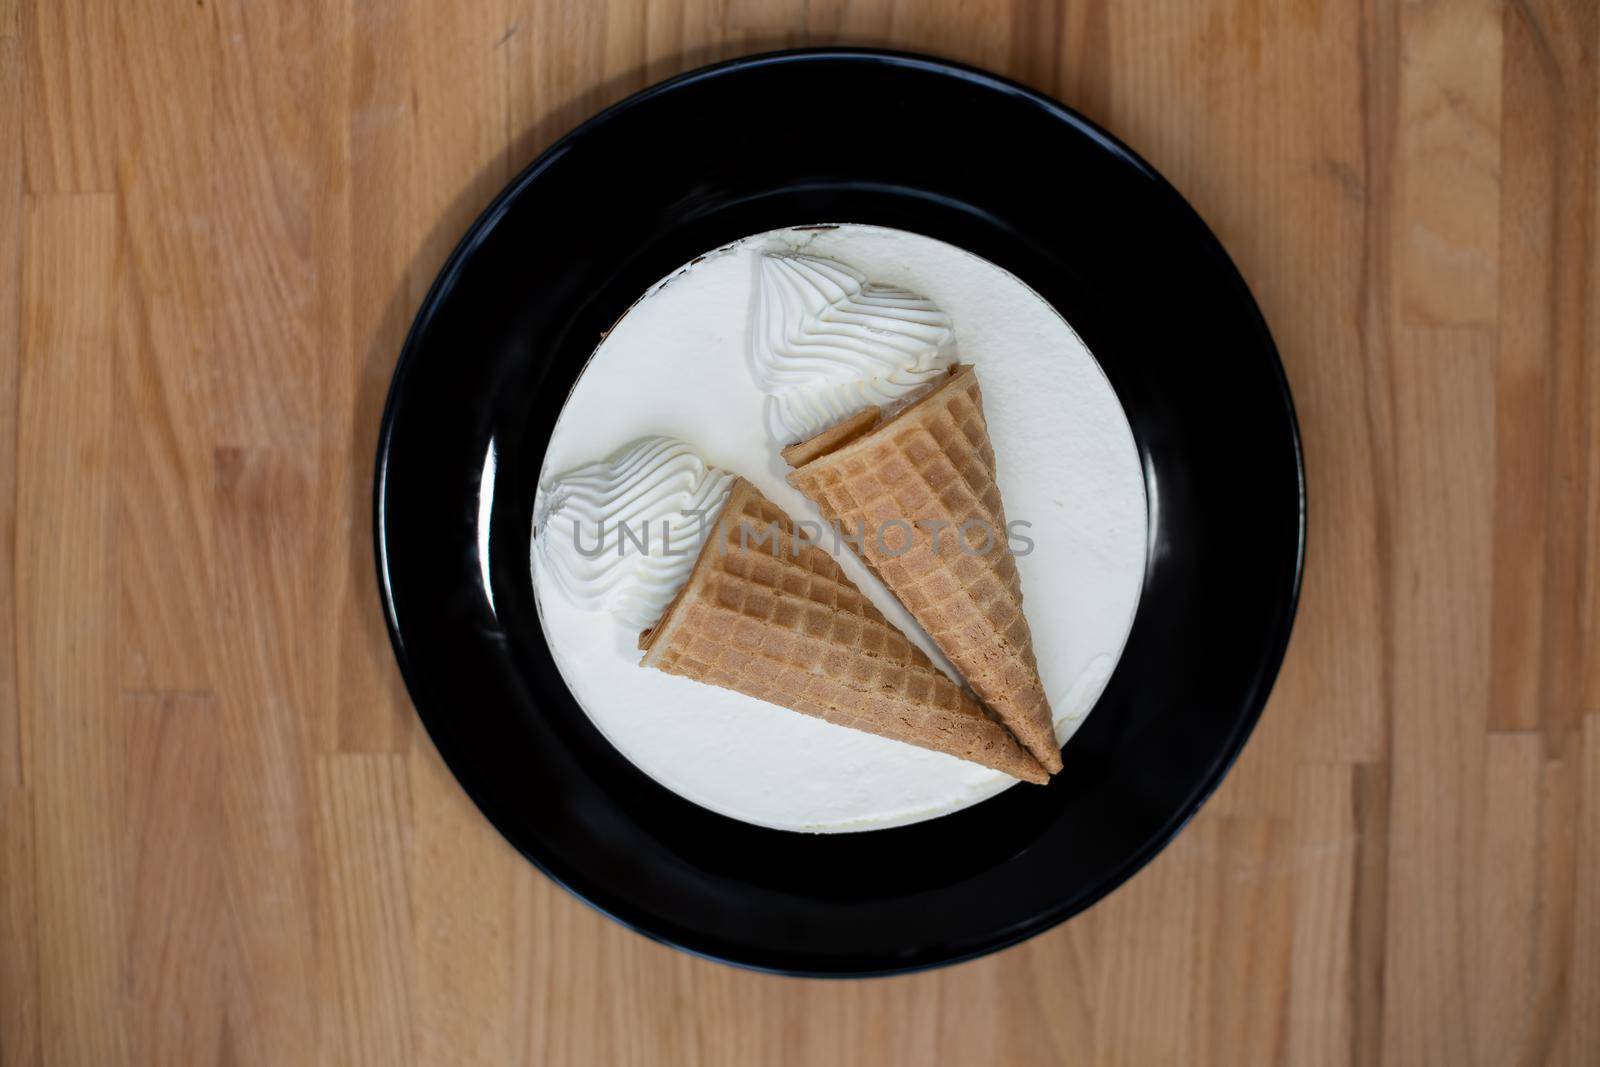 round white dessert sweet tasty ice cream cake with decoration two ice cream cones in a waffle cup on a black plate on a wooden board background. top view, close-up by Mariaprovector